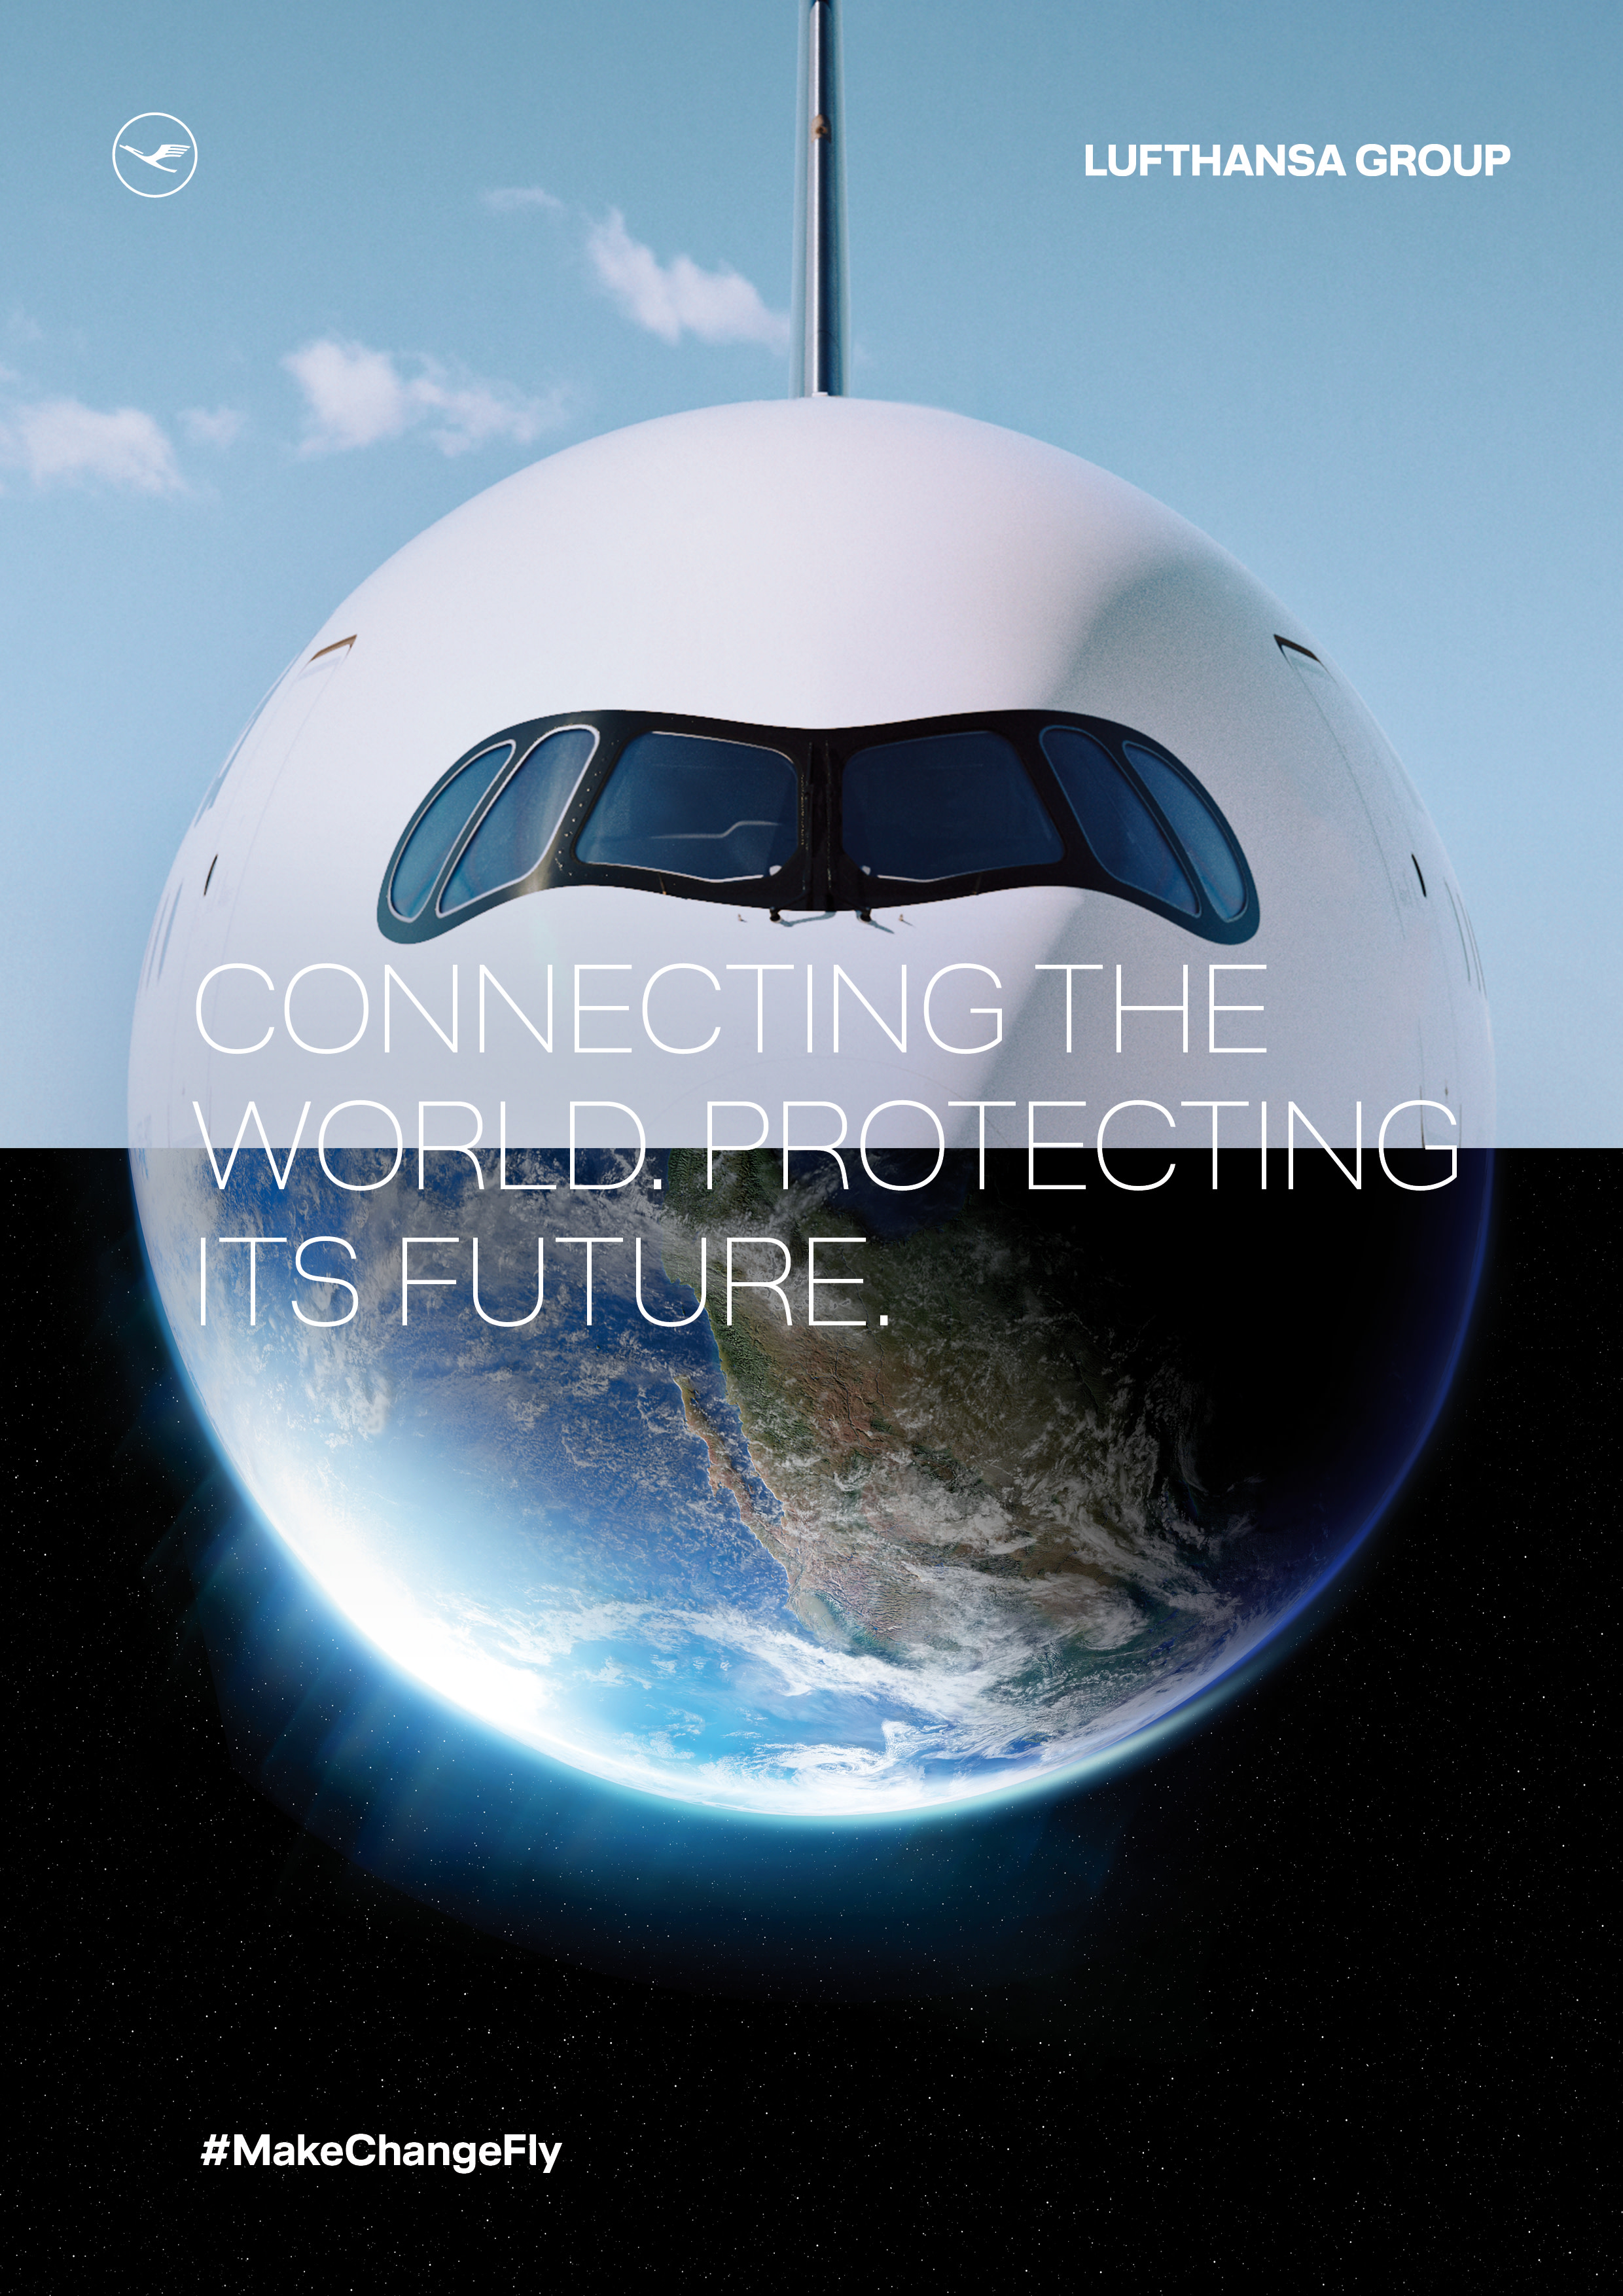 #MakeChangeFly: The Lufthansa Group provides information on making flying more sustainable.